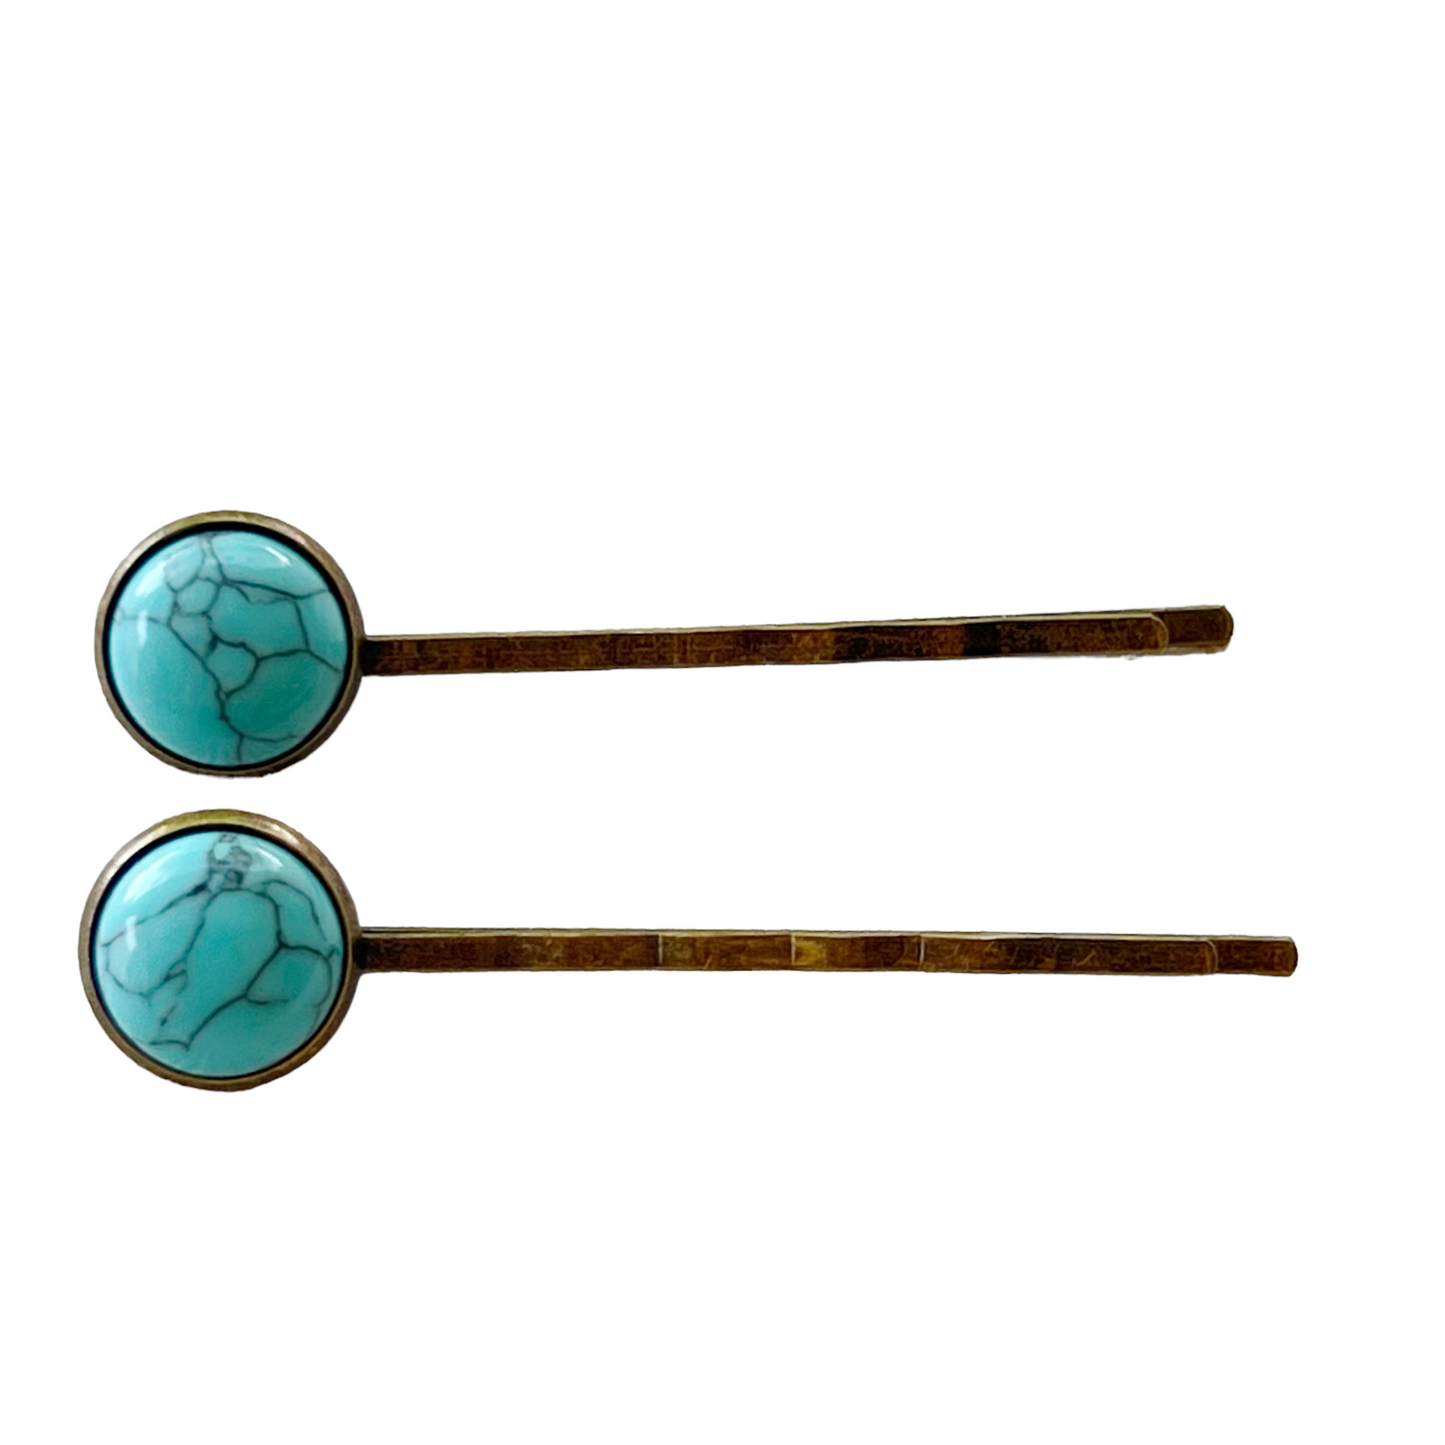 Turquoise Hair Pins - Western Cowgirl Decorative Brass Bobby Pin, Women's Southwestern Hair Accessories